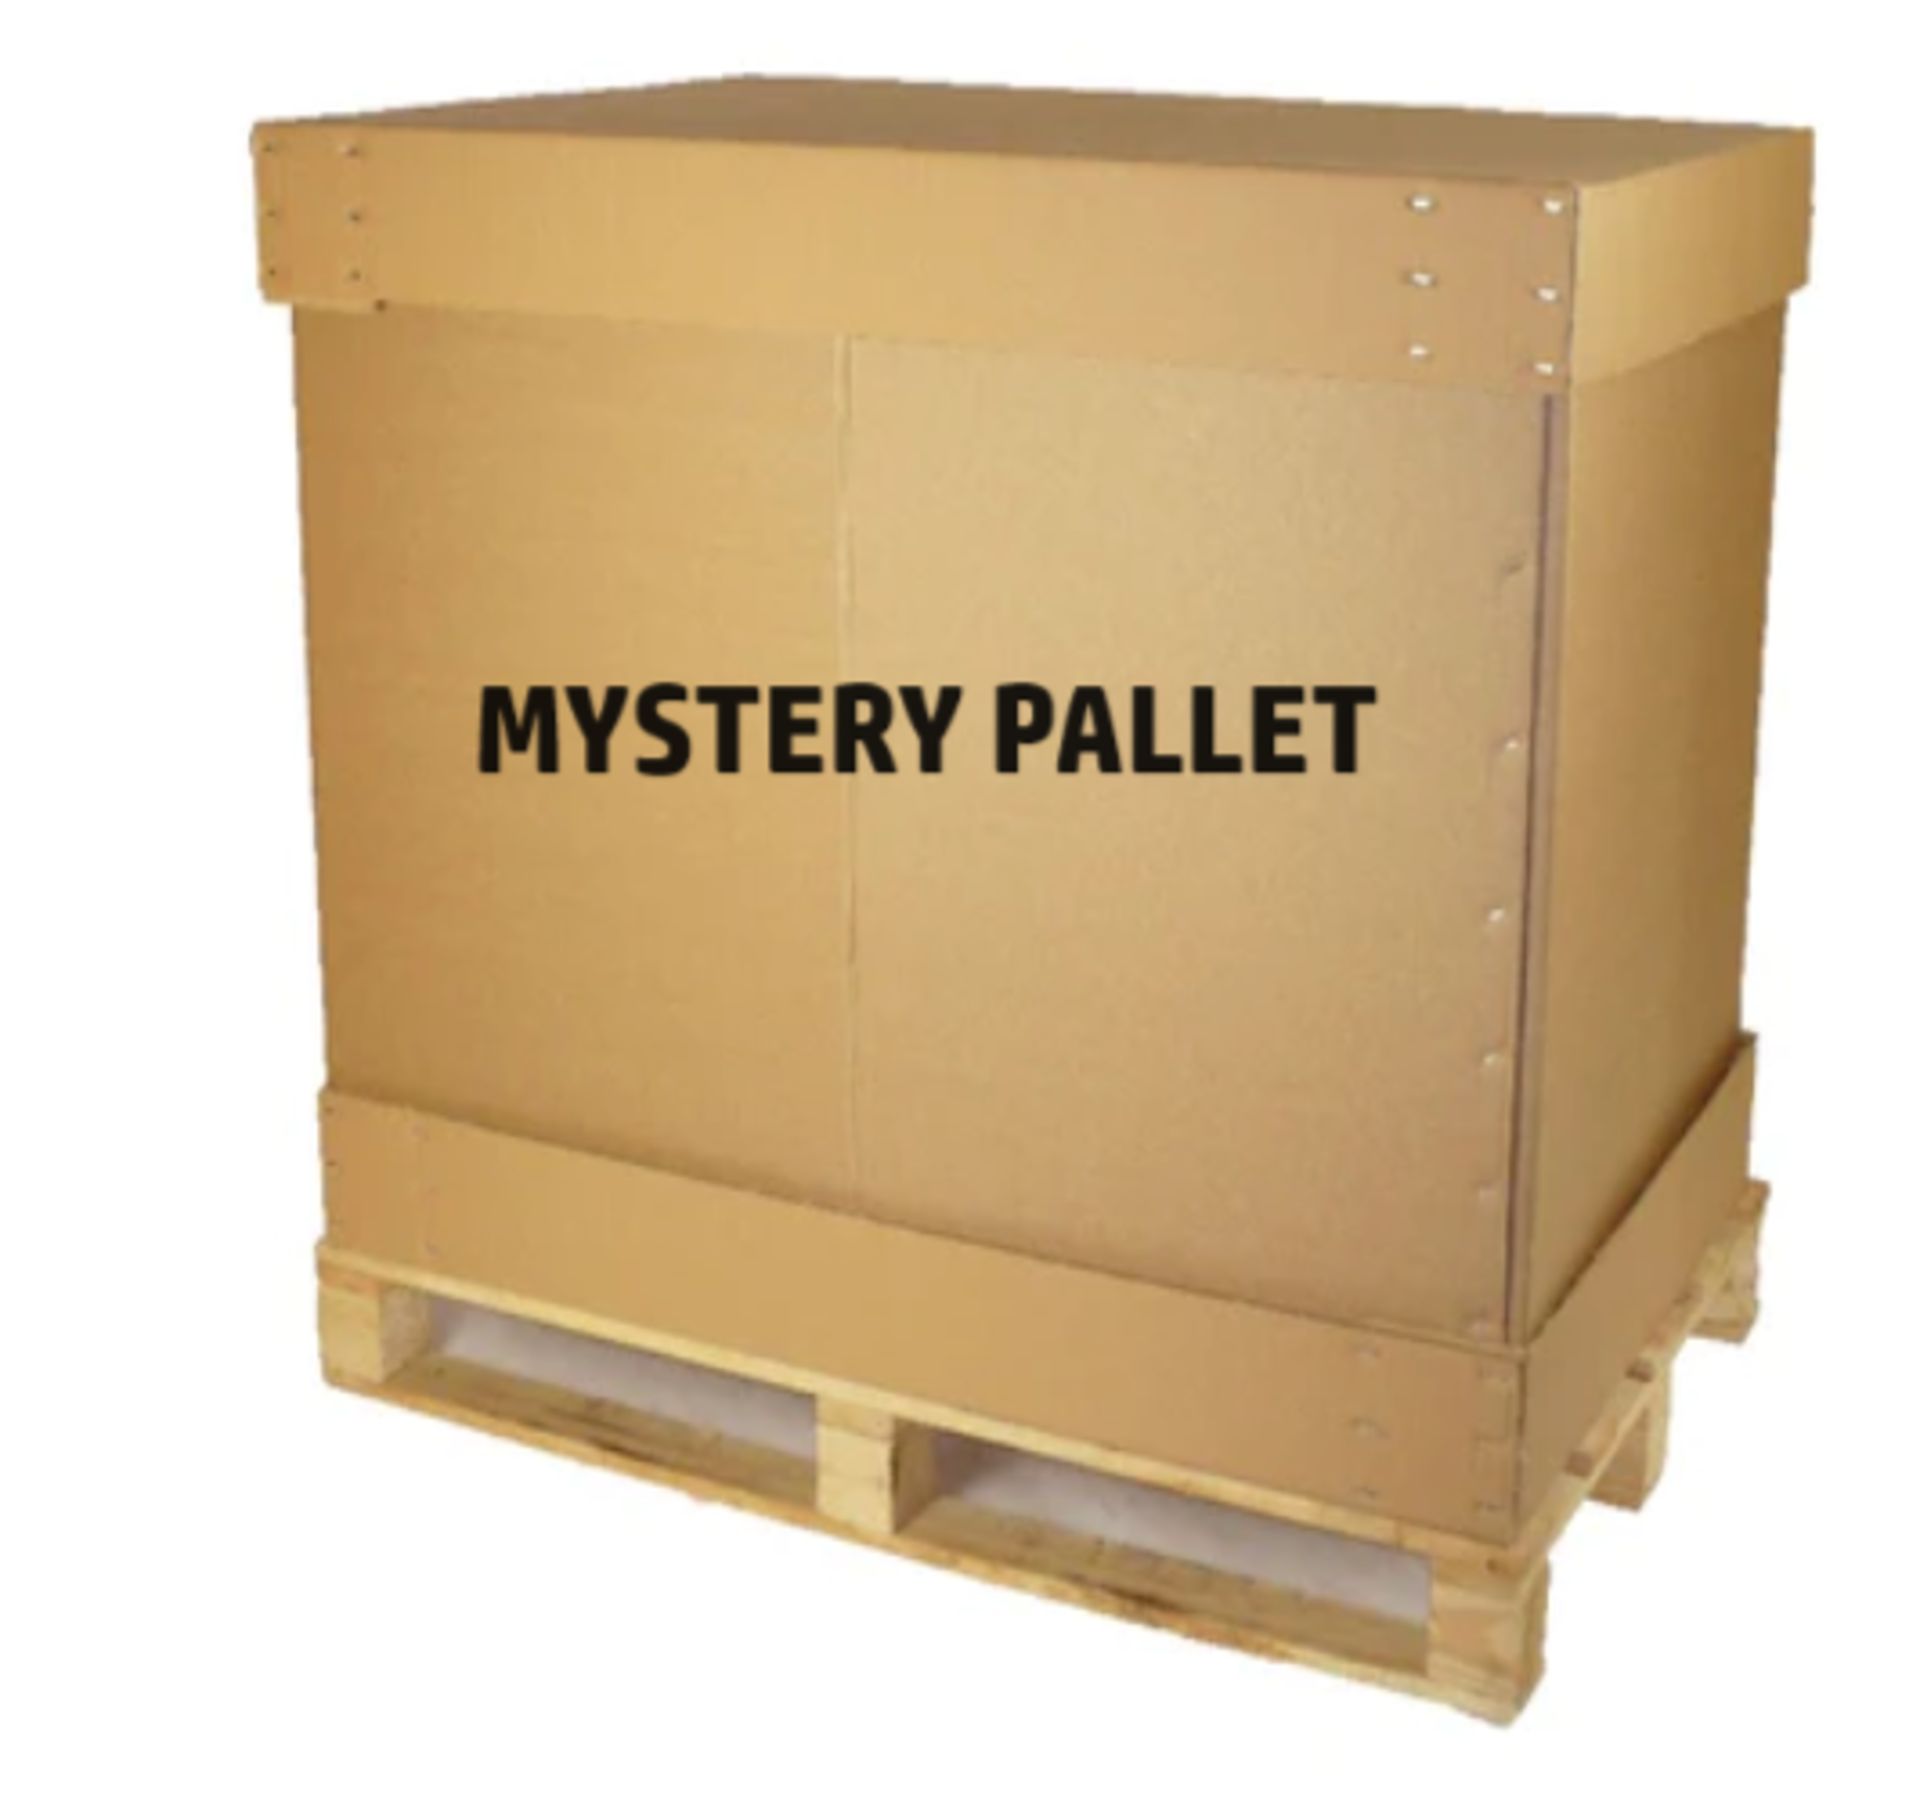 3 X PALLETS OF BRAND NEW STOCK FROM MAJOR RETAILER - MEGA CLEARANCE DEAL!!!